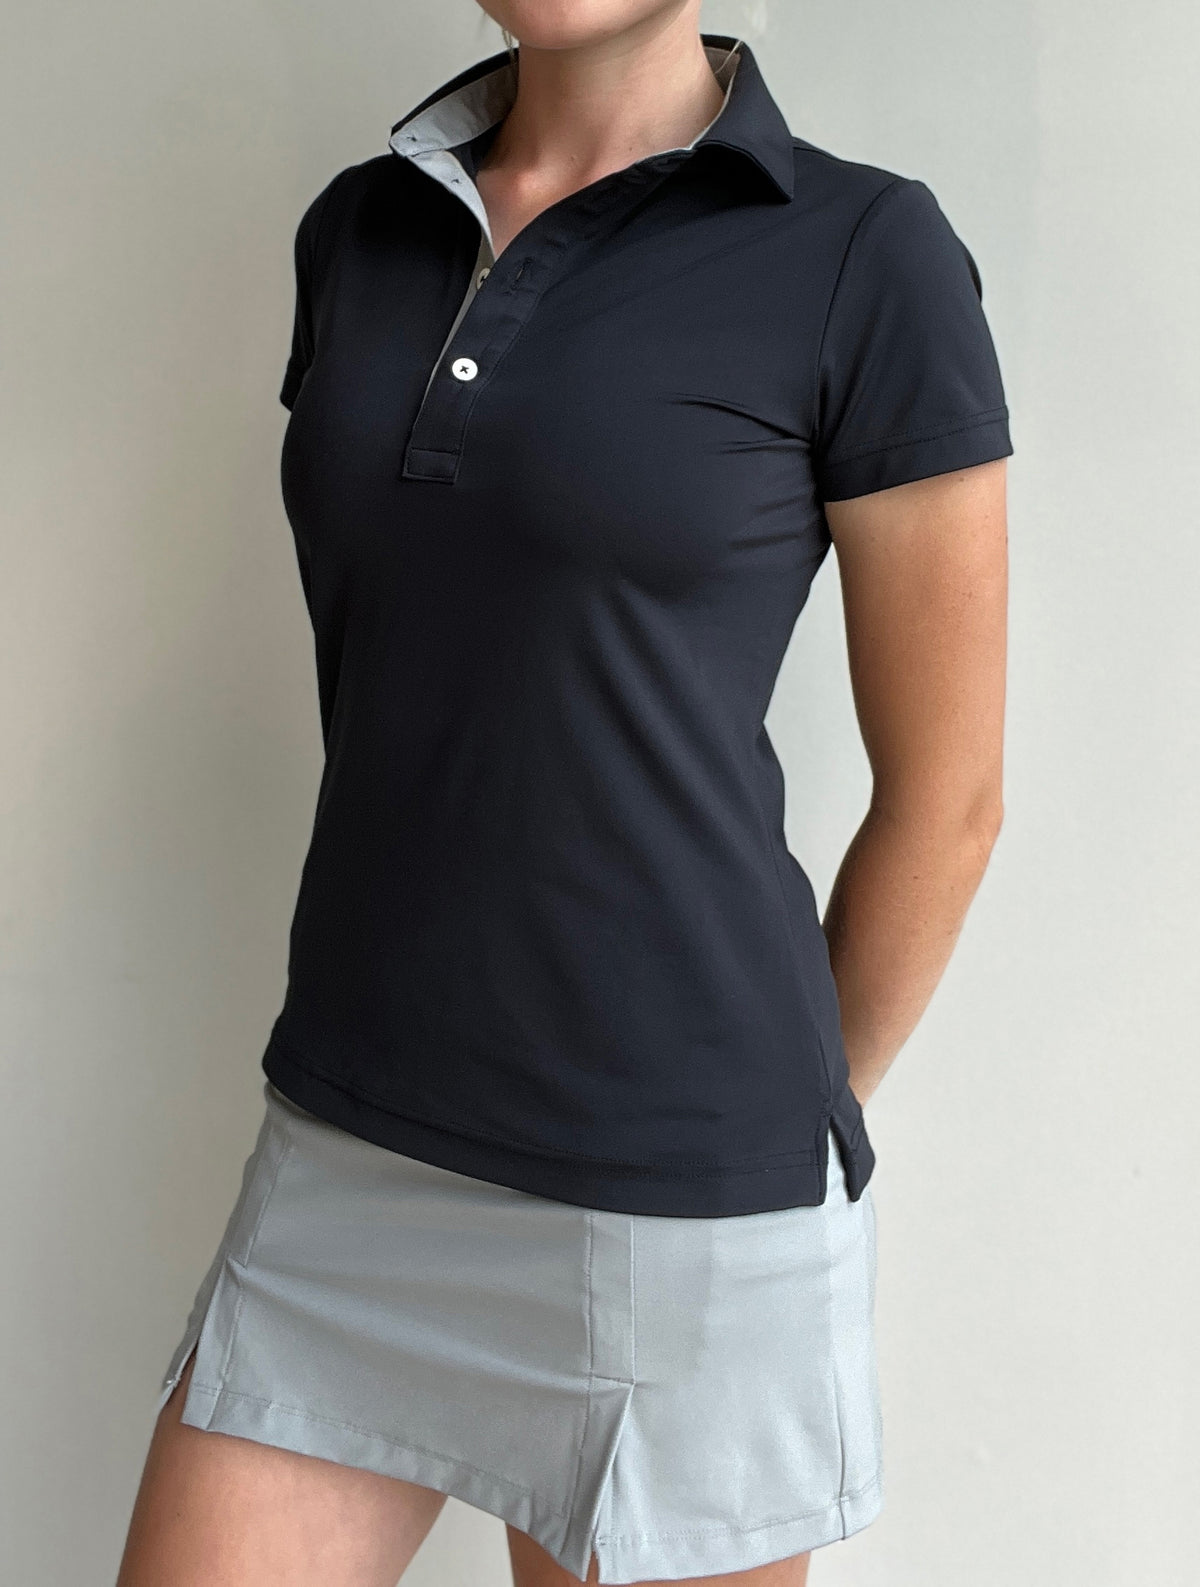 WOMEN'S ATHLETIC BUTTON UP POLO